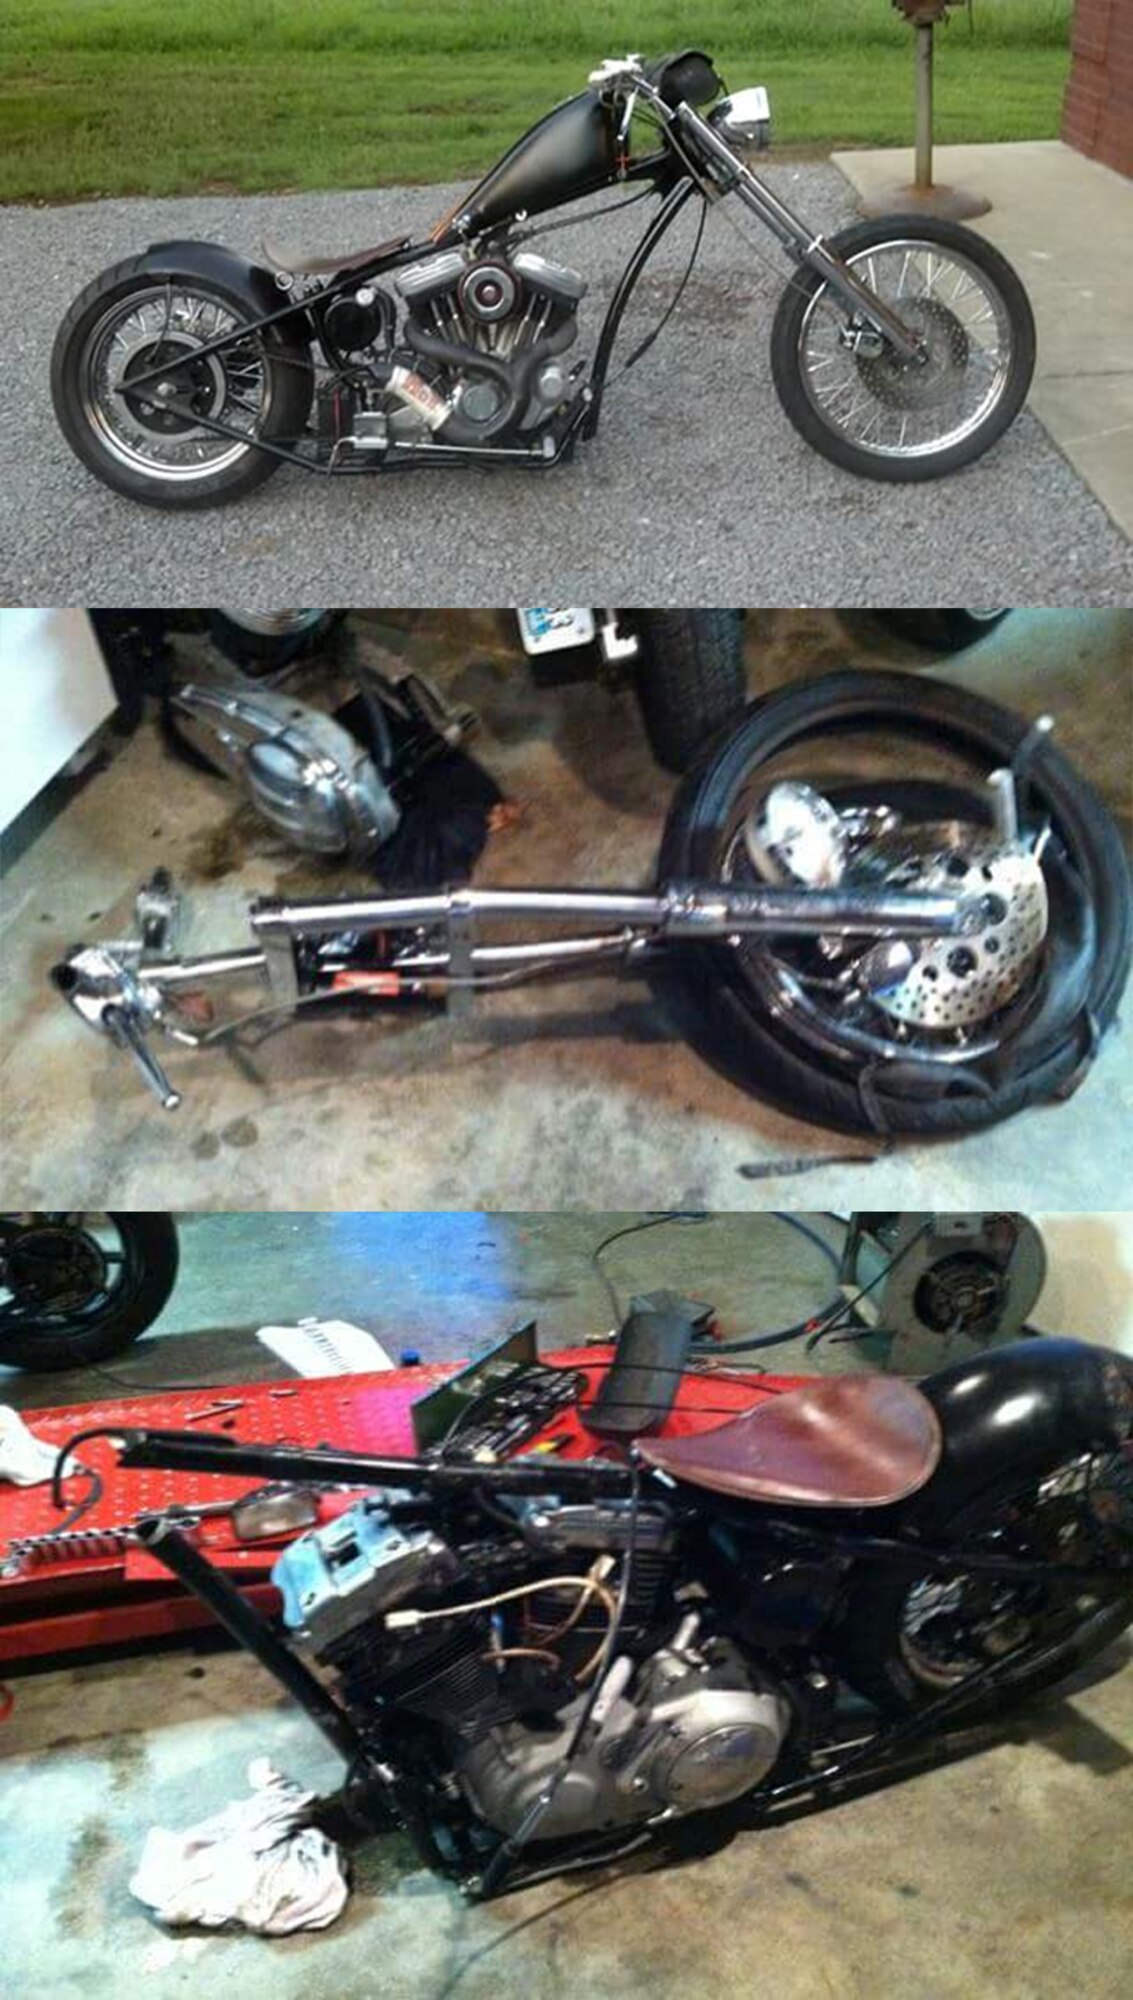 A motorcycle accident on July 26, 2012 left Jimmy Richardson, an instrument technician with the ATA Test Operations Branch, with severe injuries and years of physical therapy. His motorcycle is shown broken in half by the accident as well as a before-photo in this photo compilation. (Photo provided)